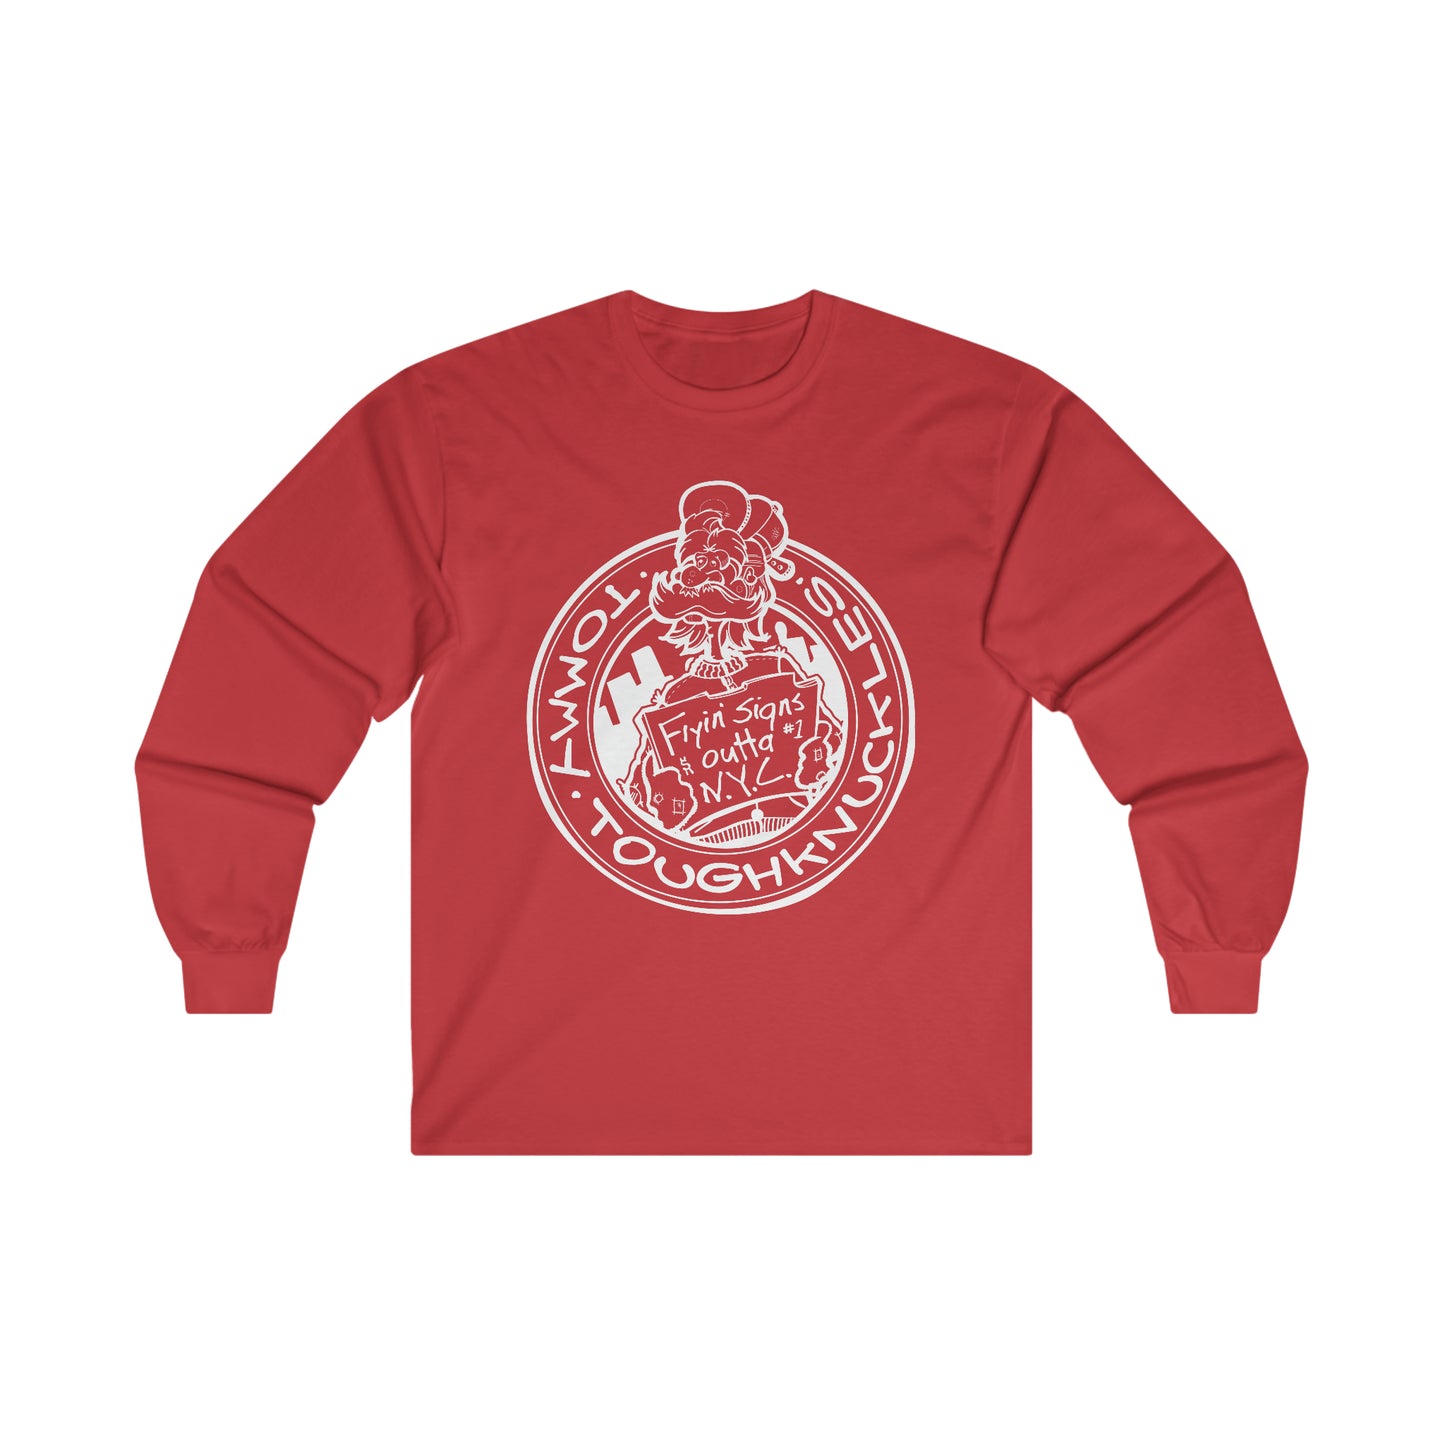 Tommy ToughKnuckles - Long Sleeve Shirt